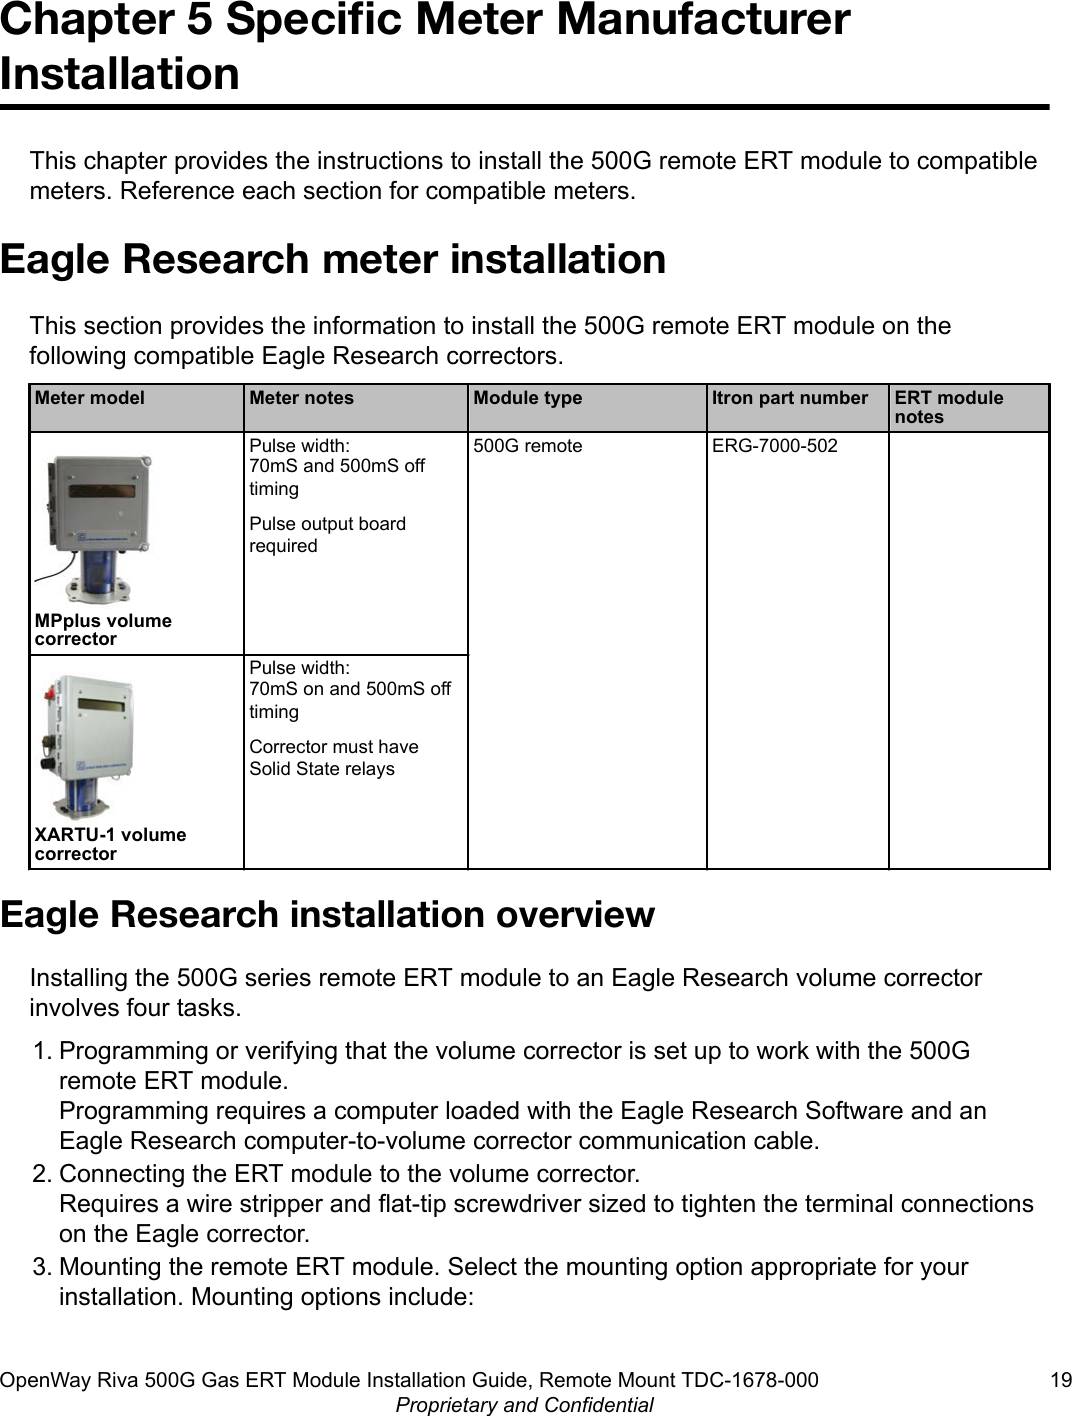 Chapter 5 Speciﬁc Meter ManufacturerInstallationThis chapter provides the instructions to install the 500G remote ERT module to compatiblemeters. Reference each section for compatible meters.Eagle Research meter installationThis section provides the information to install the 500G remote ERT module on thefollowing compatible Eagle Research correctors.Meter model Meter notes Module type Itron part number ERT modulenotesMPplus volumecorrectorPulse width:70mS and 500mS offtimingPulse output boardrequired500G remote ERG-7000-502XARTU-1 volumecorrectorPulse width:70mS on and 500mS offtimingCorrector must haveSolid State relaysEagle Research installation overviewInstalling the 500G series remote ERT module to an Eagle Research volume correctorinvolves four tasks.1. Programming or verifying that the volume corrector is set up to work with the 500Gremote ERT module.Programming requires a computer loaded with the Eagle Research Software and anEagle Research computer-to-volume corrector communication cable.2. Connecting the ERT module to the volume corrector.Requires a wire stripper and flat-tip screwdriver sized to tighten the terminal connectionson the Eagle corrector.3. Mounting the remote ERT module. Select the mounting option appropriate for yourinstallation. Mounting options include:OpenWay Riva 500G Gas ERT Module Installation Guide, Remote Mount TDC-1678-000 19Proprietary and Confidential